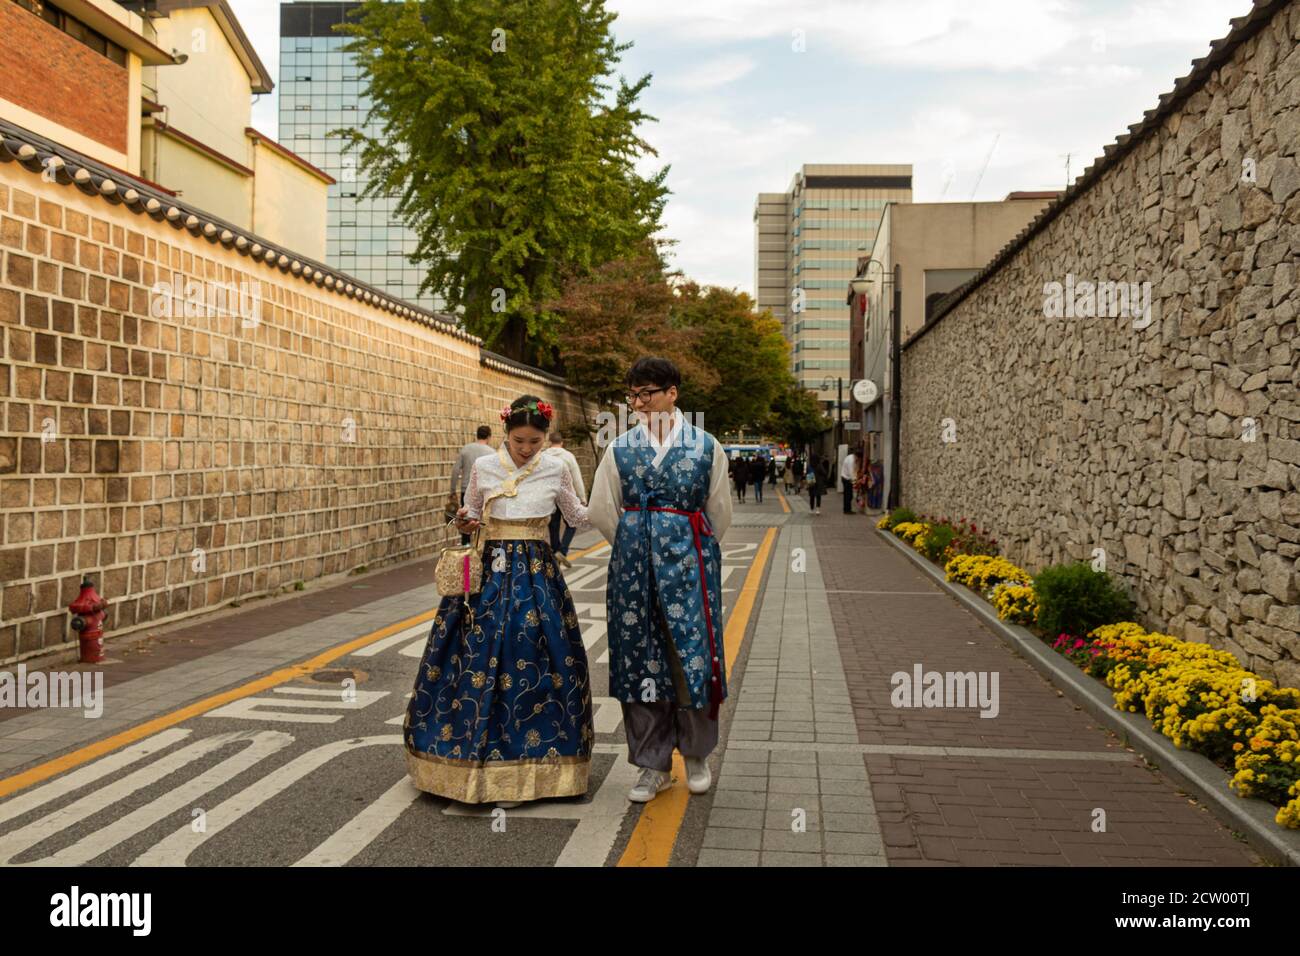 Seoul, South Korea - October 19th 2017: A Korean couple in traditional hanbok dress walking along an alley at sunset, Seoul, South Korea Stock Photo